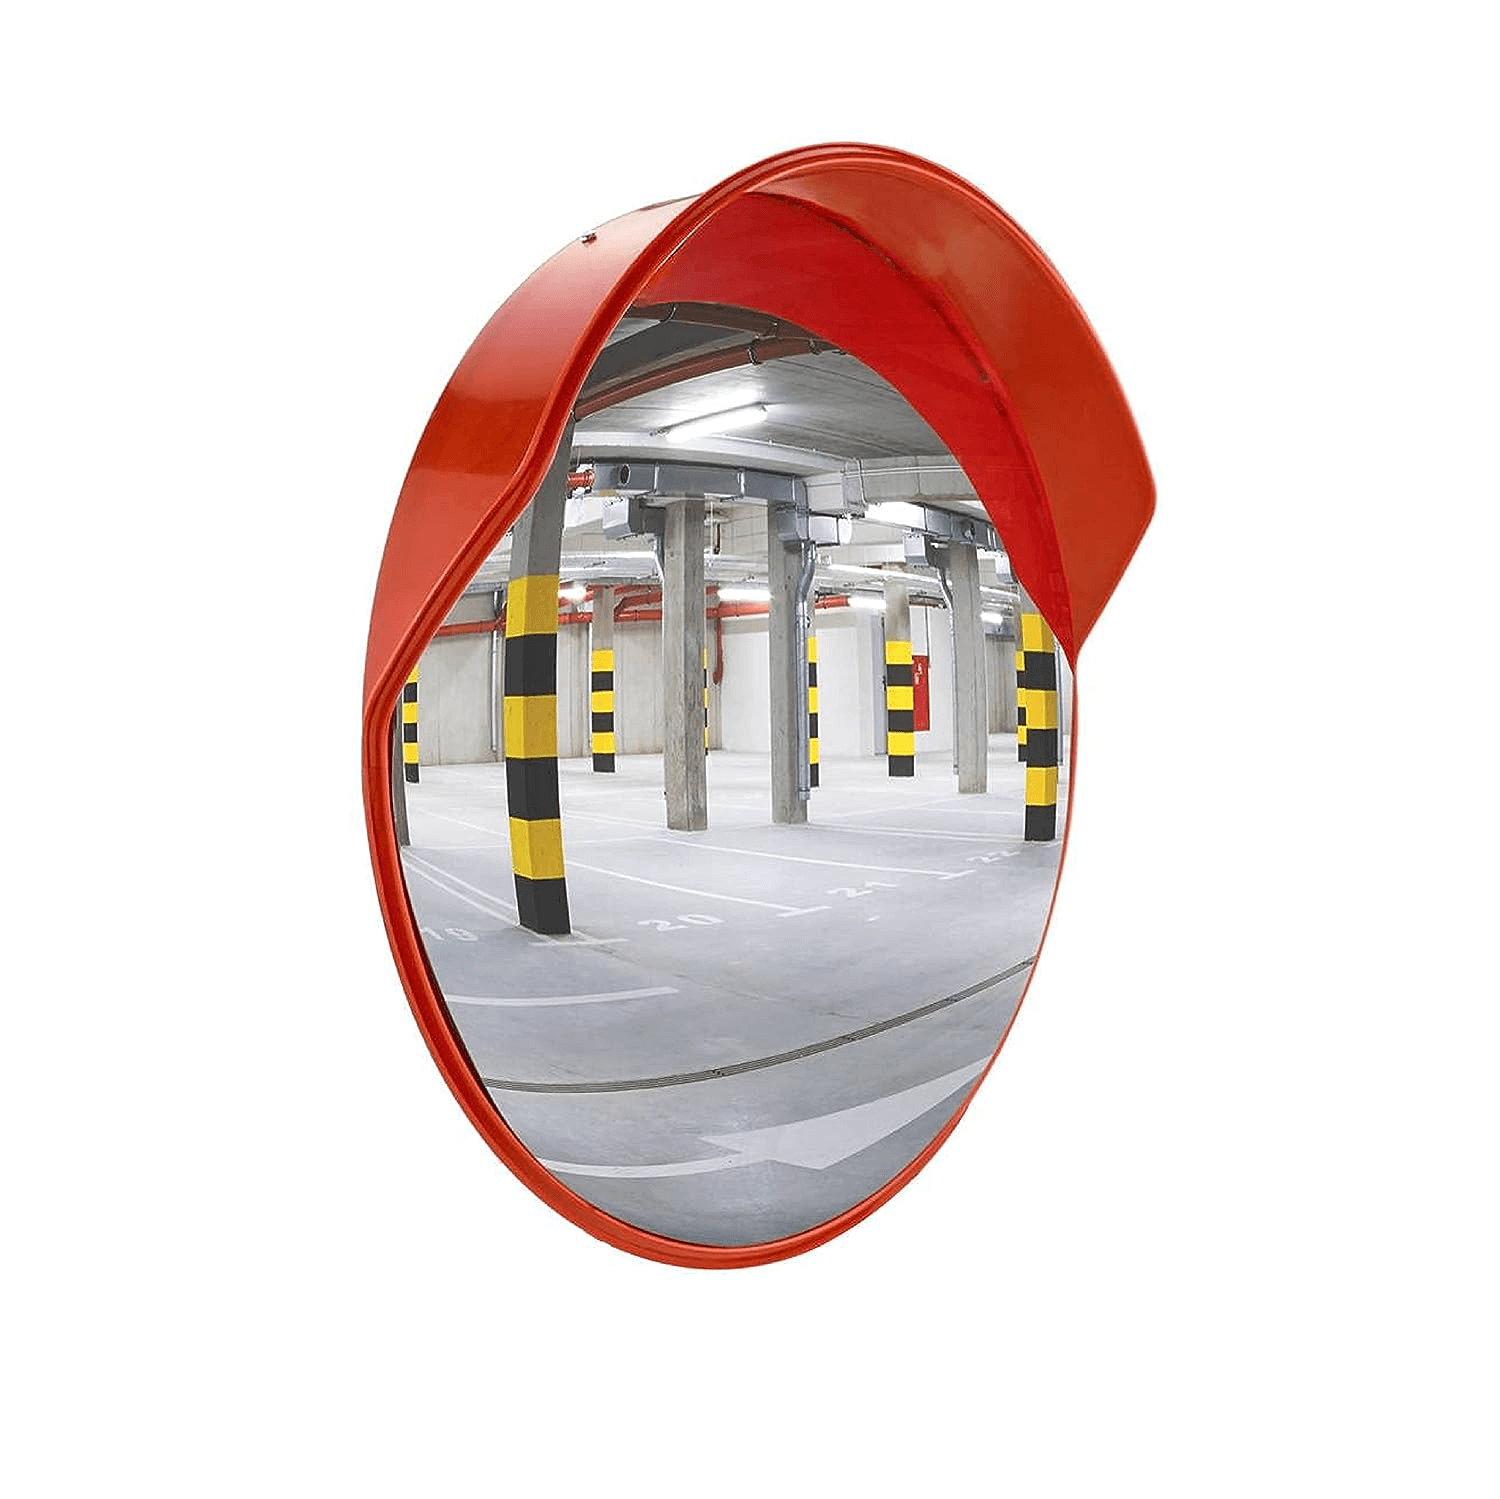 robustt-unbreakable-32-inch-convex-mirror-for-road-safety-traffic-security-with-installation-kit-rearview-radar-mirror